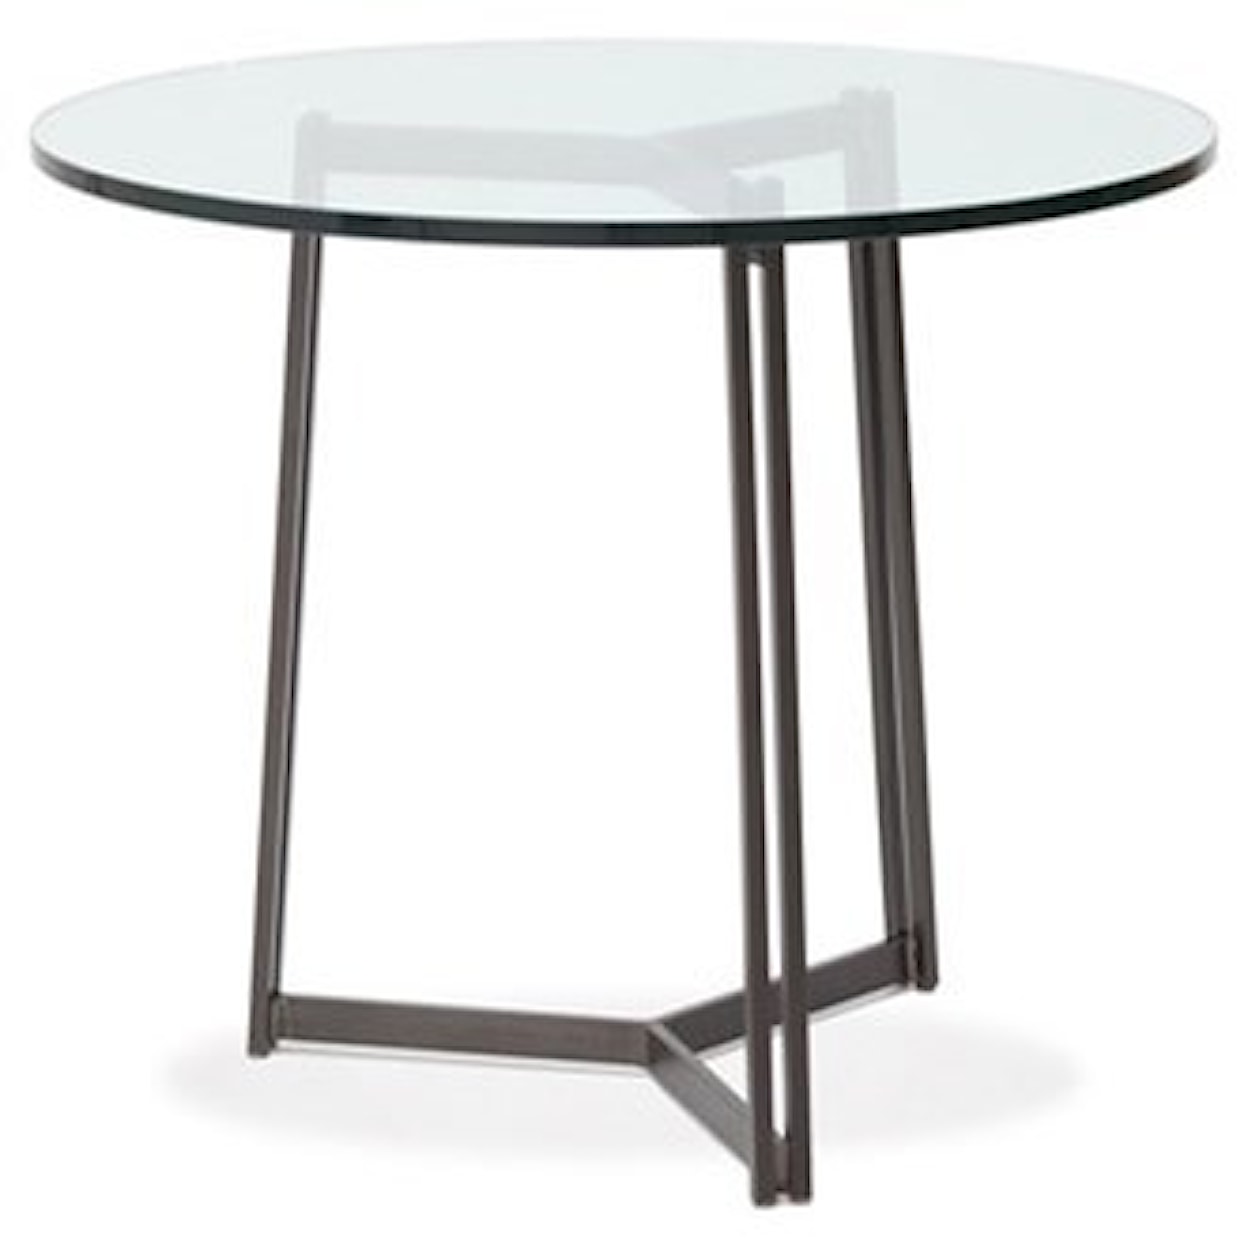 Charleston Forge Dining Room Accents Kern Casual Dining Table